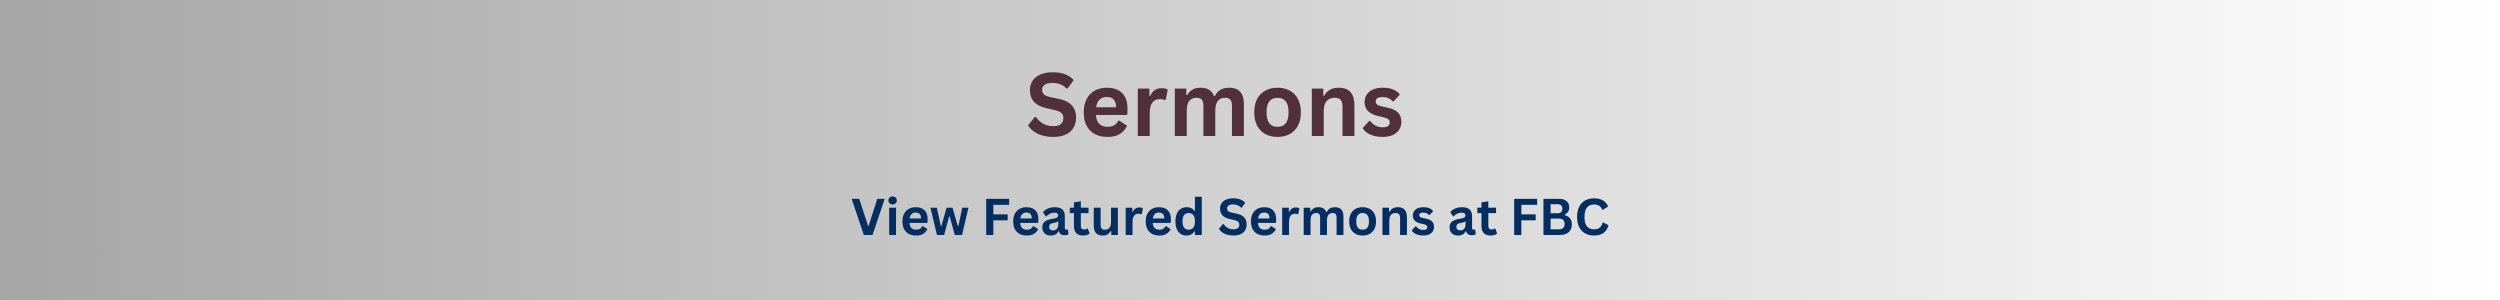 Sermons at the First Baptist Church of Rogersville